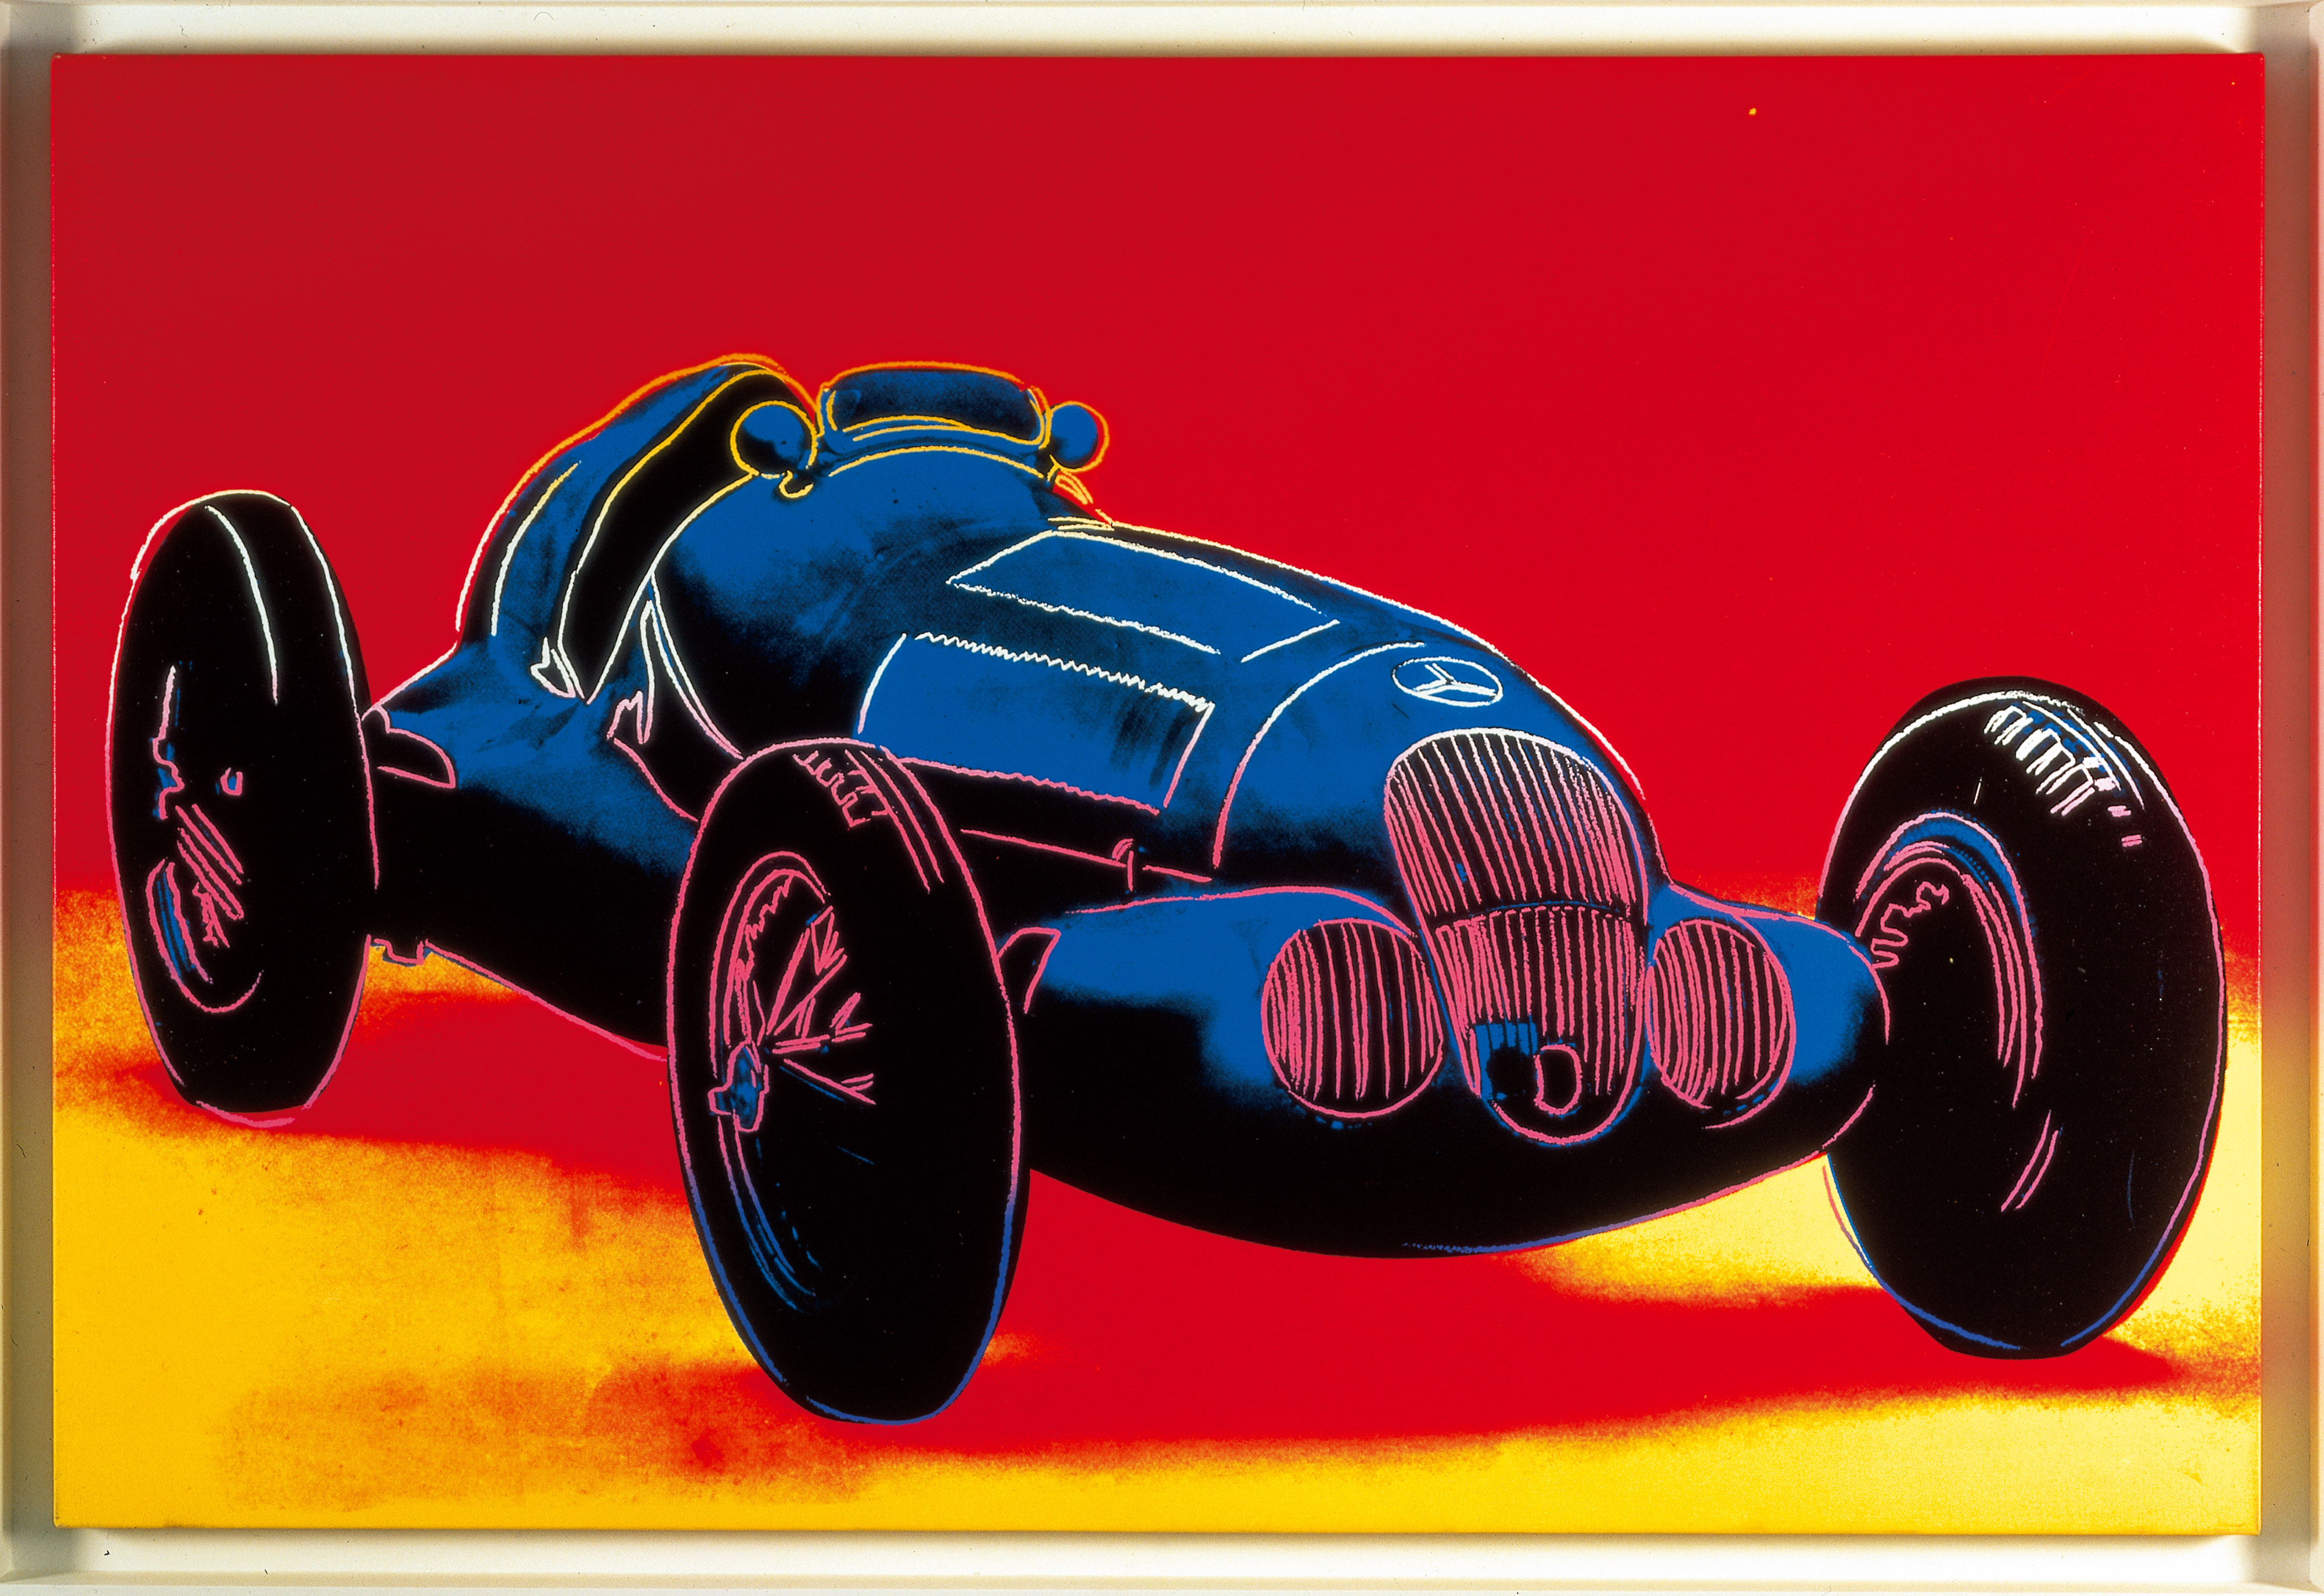 Andy Warhol's 'Cars' series glides to Petersen Automotive Museum 